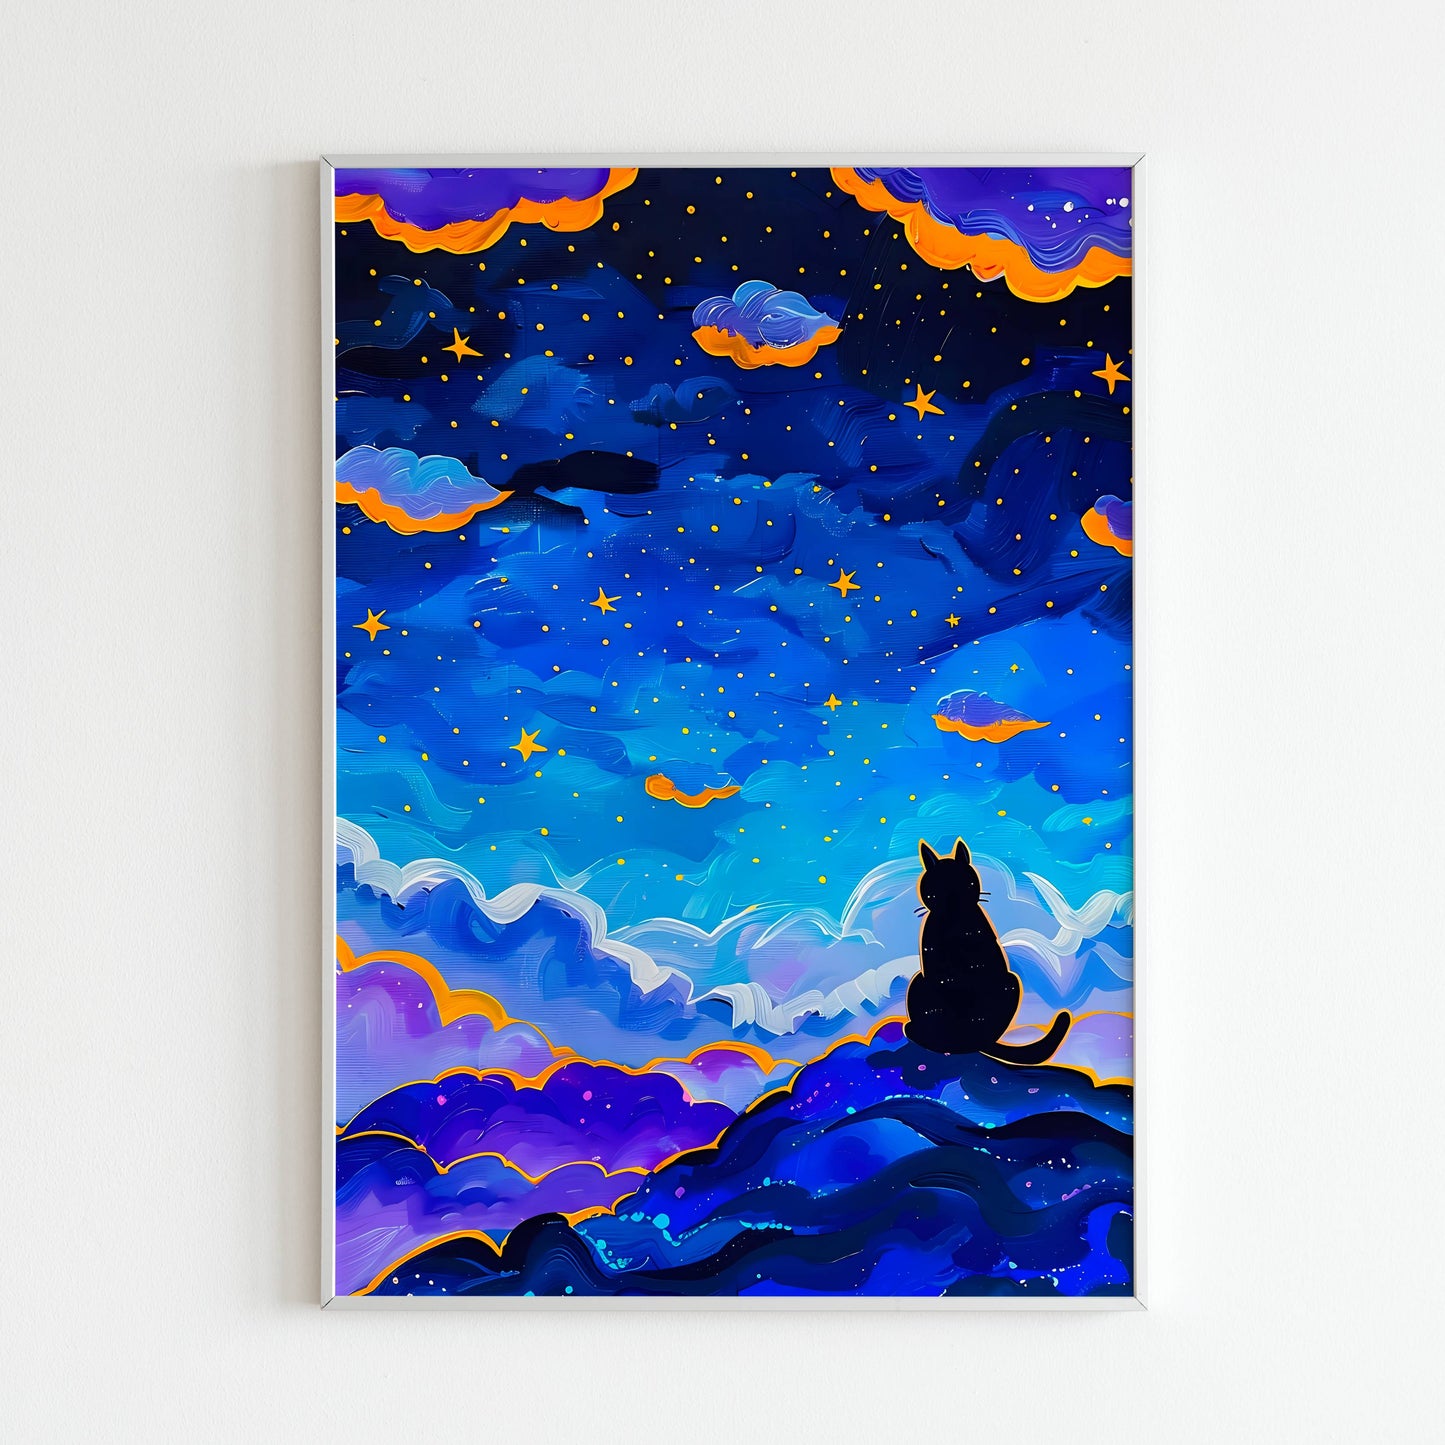 See a cat gazing up at a starry night sky on a hillside with this printable poster (physical or digital).